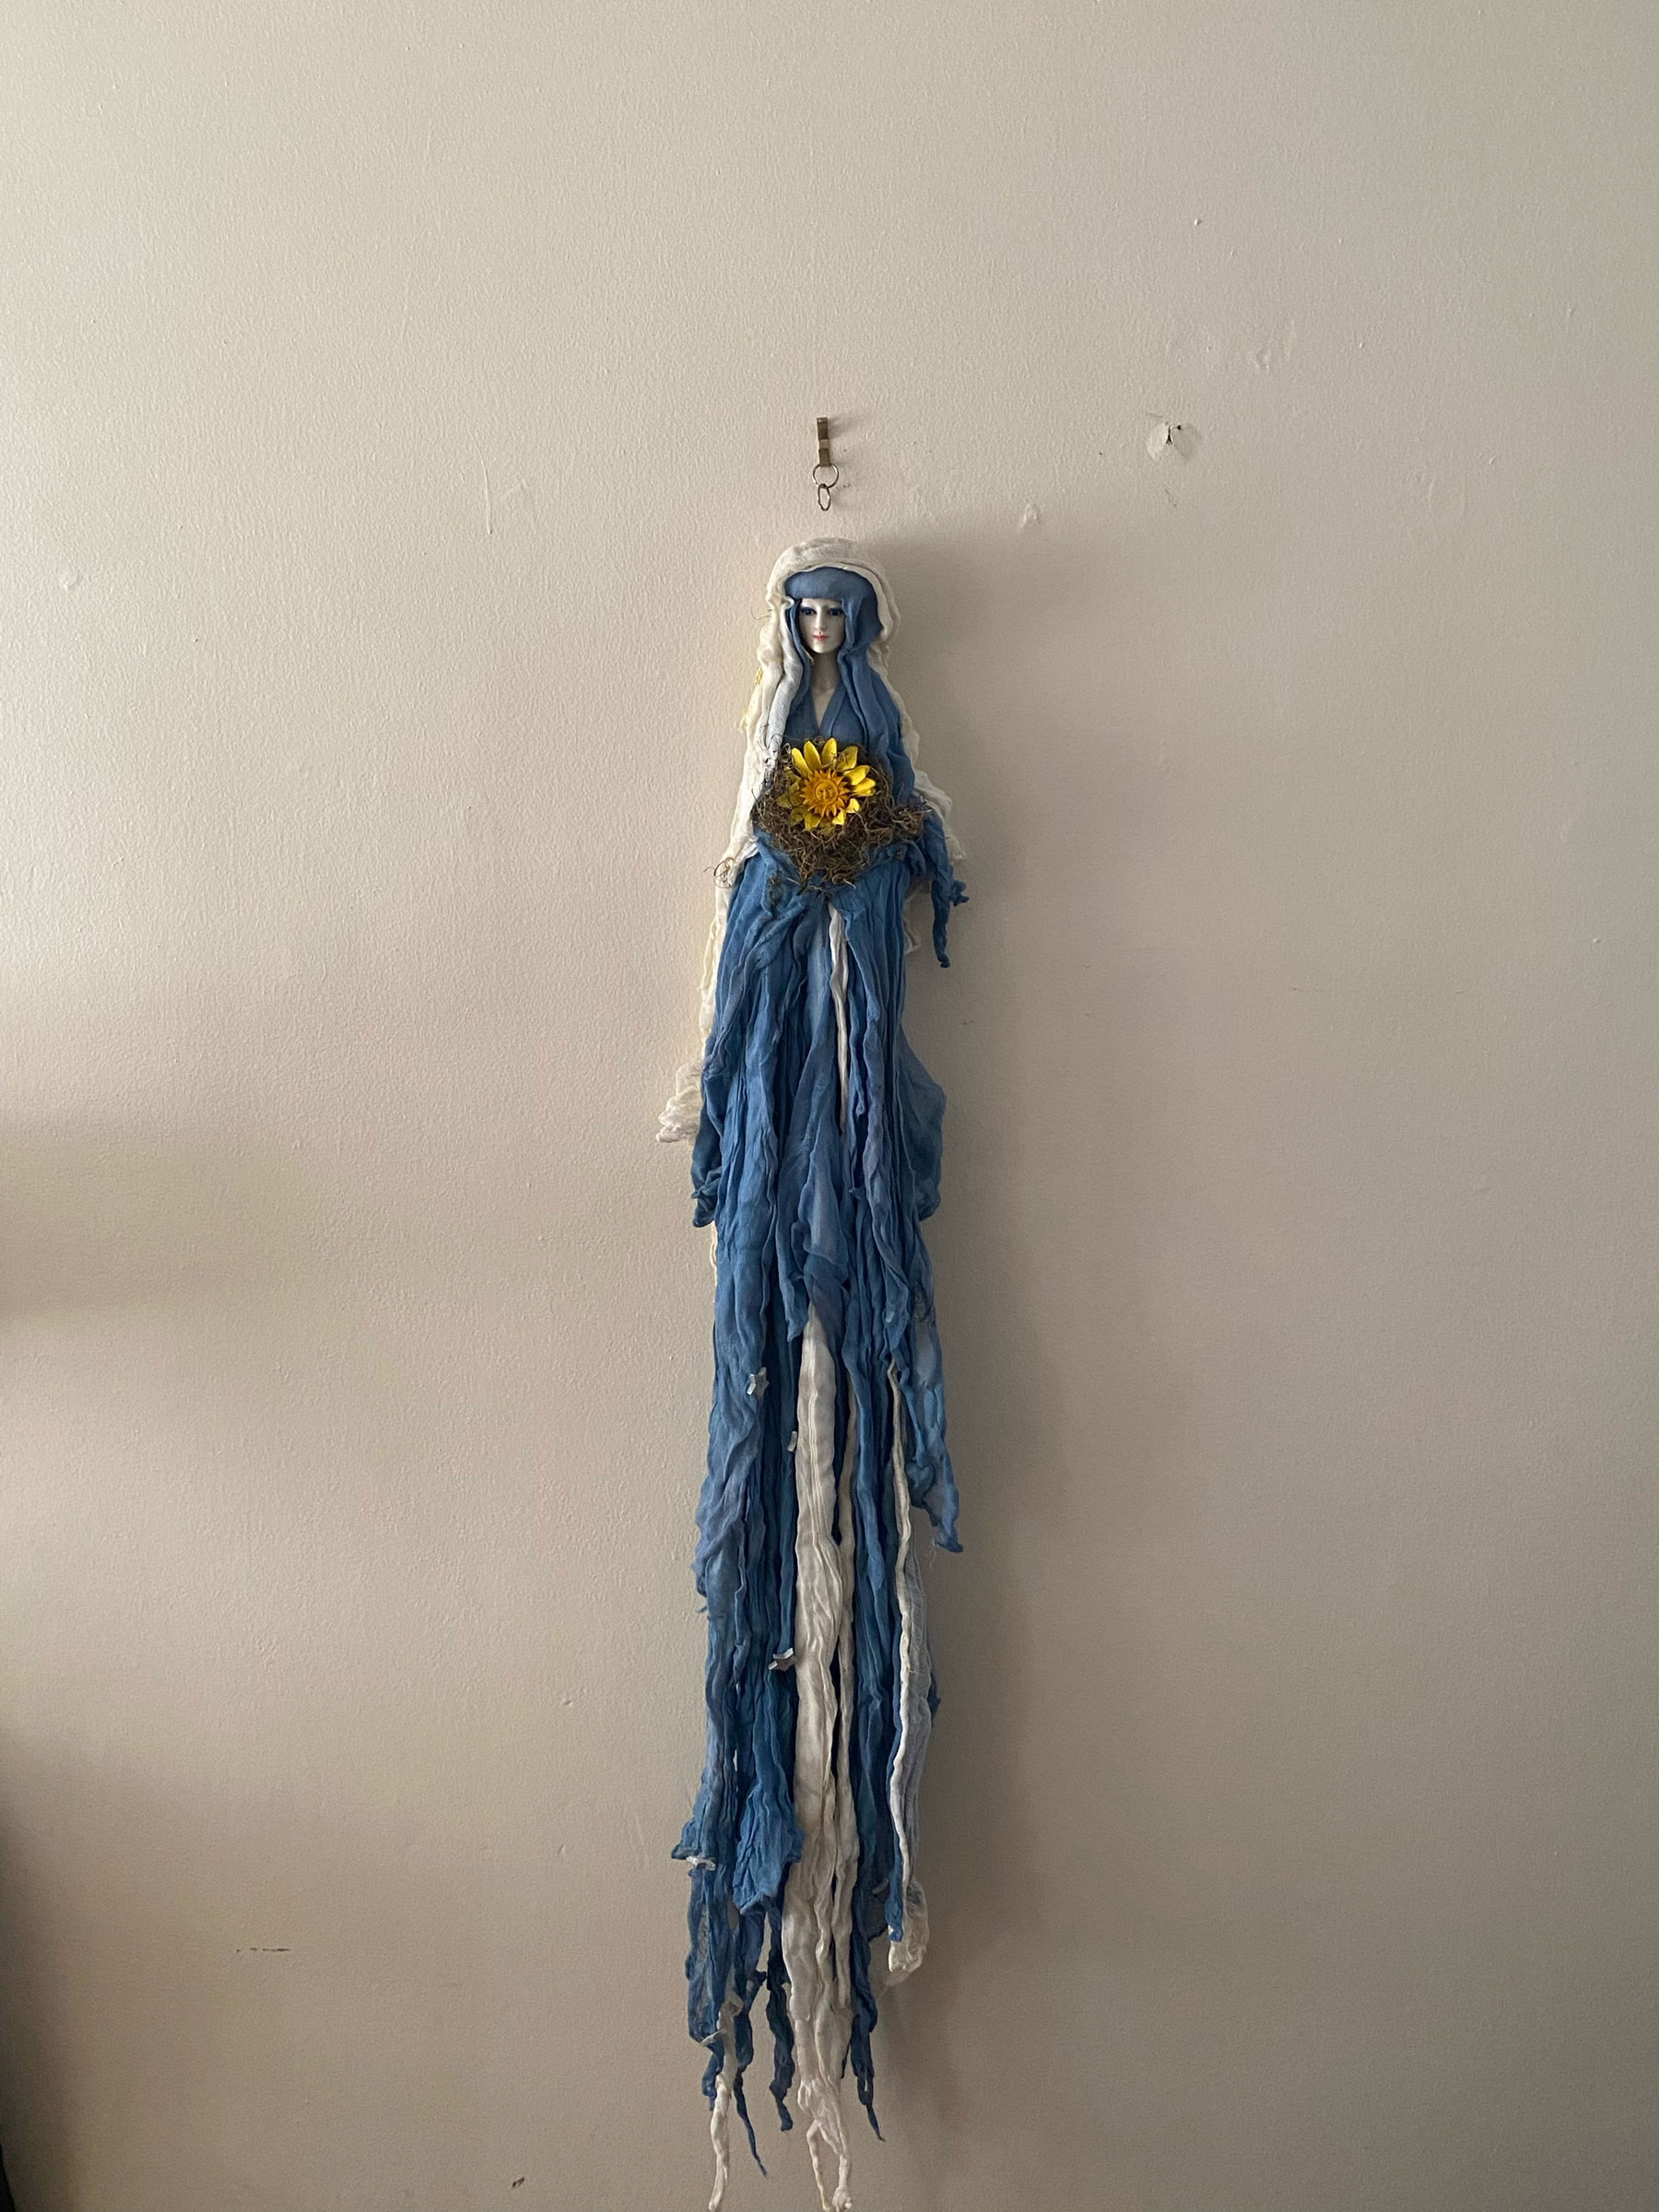 Our Lady of the Manifest doll